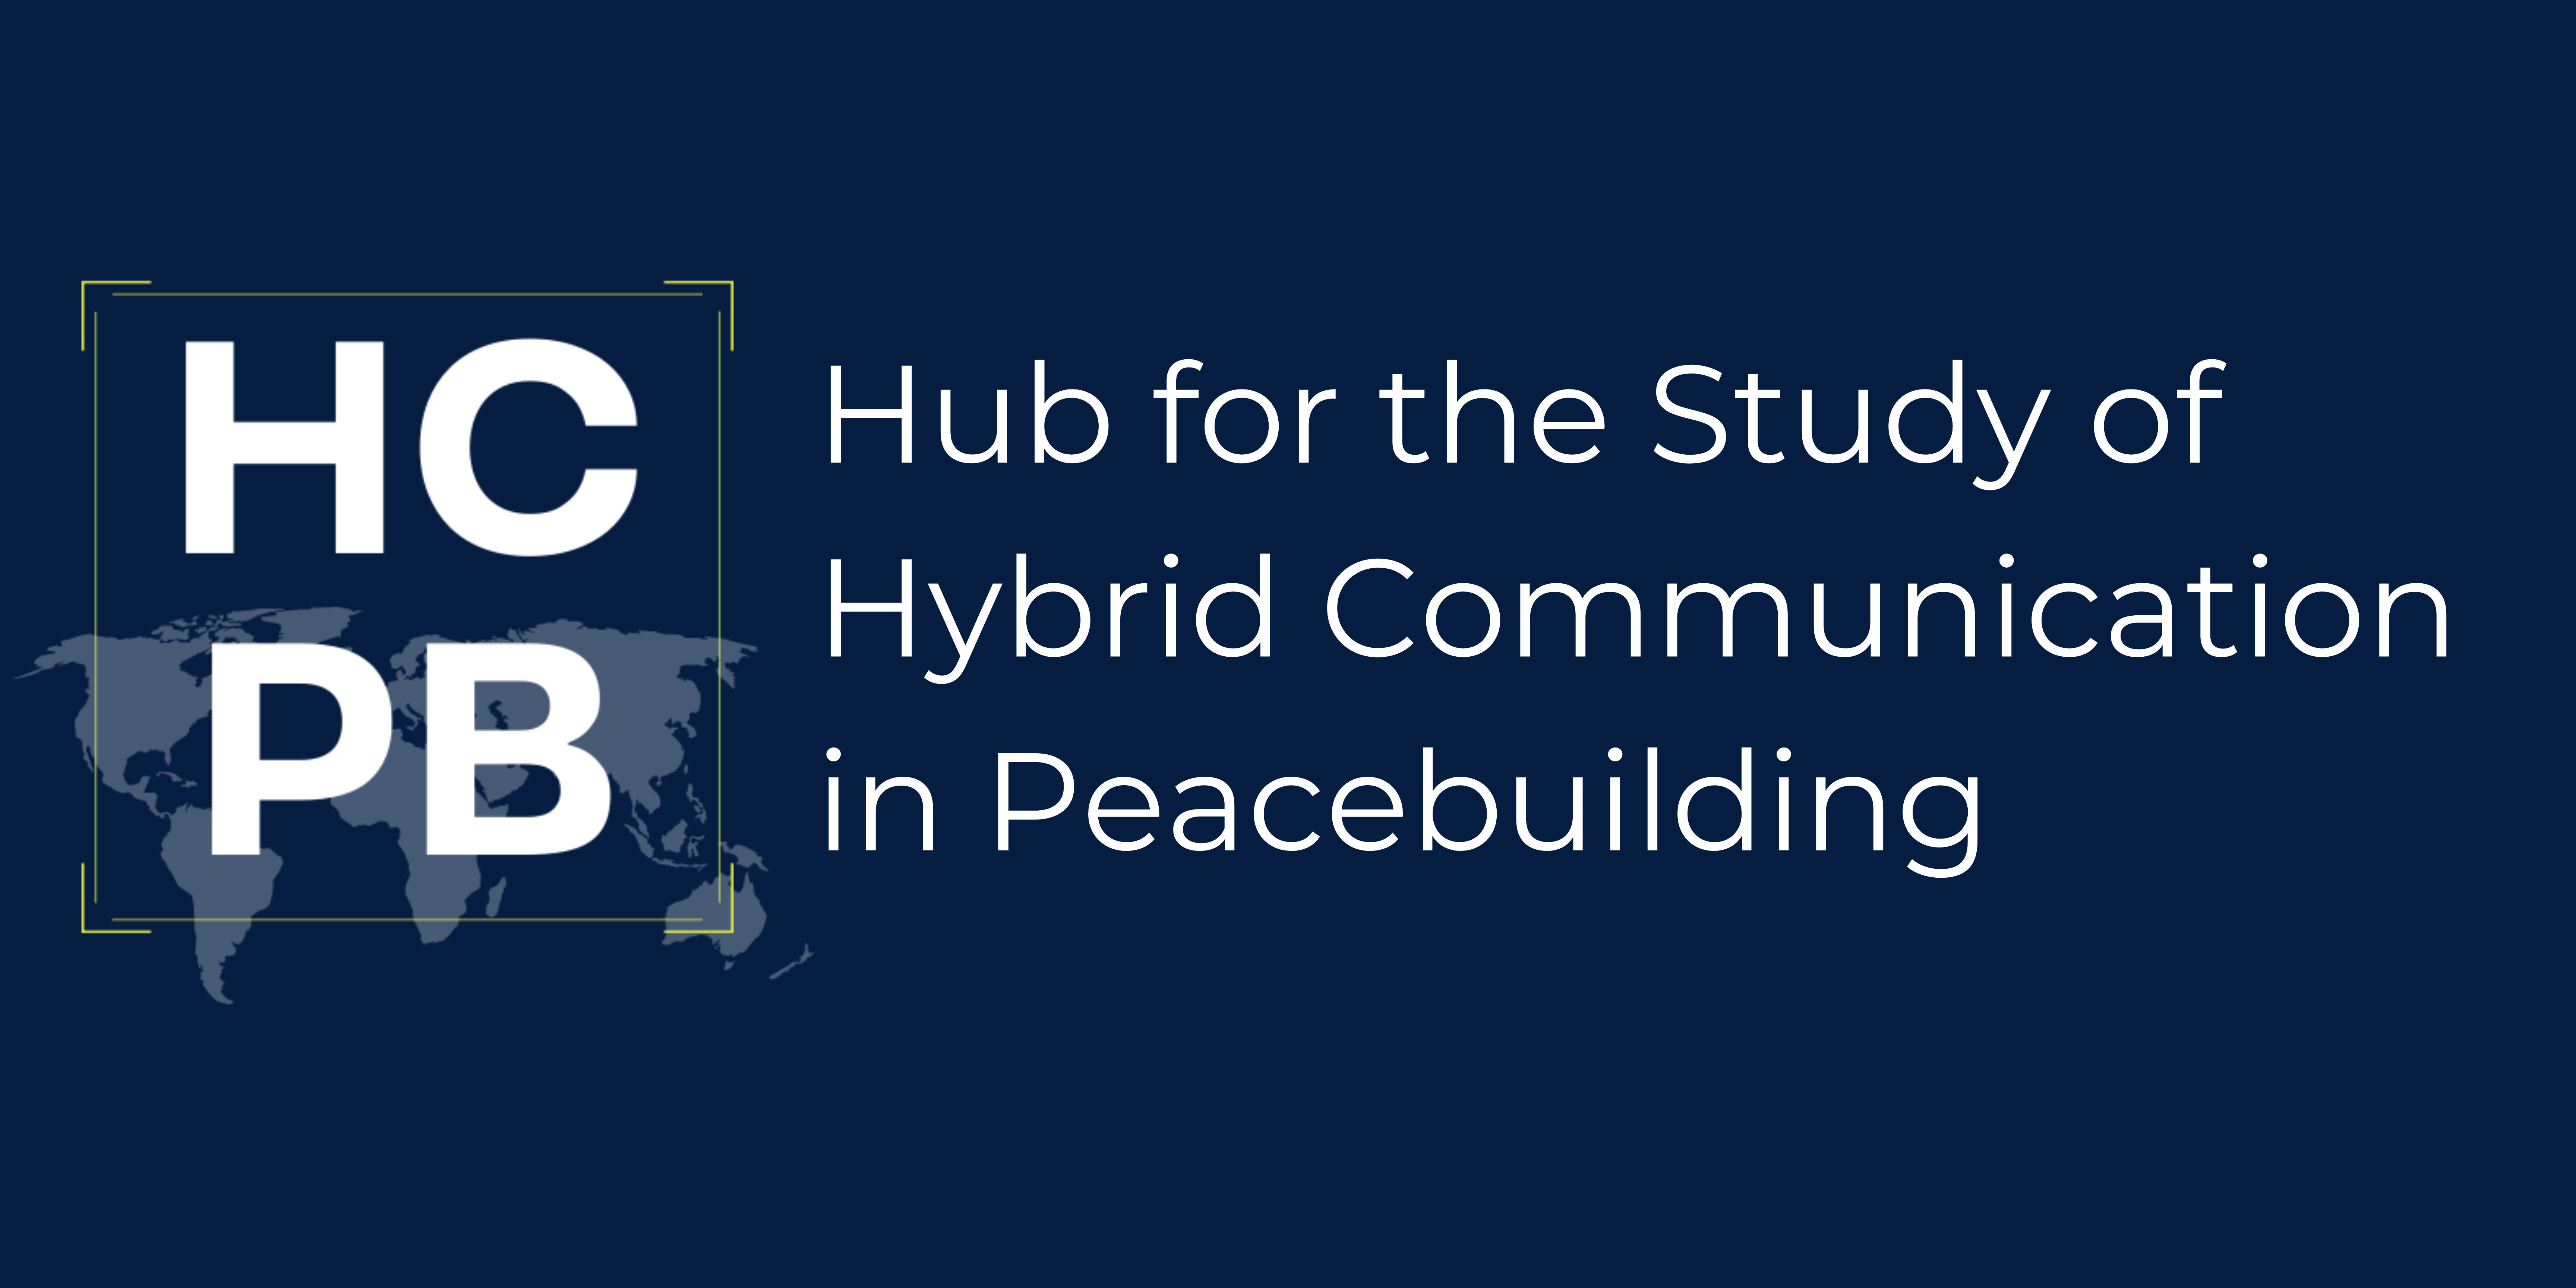 Hub for the Study of Hybrid Communication in Peacebuilding